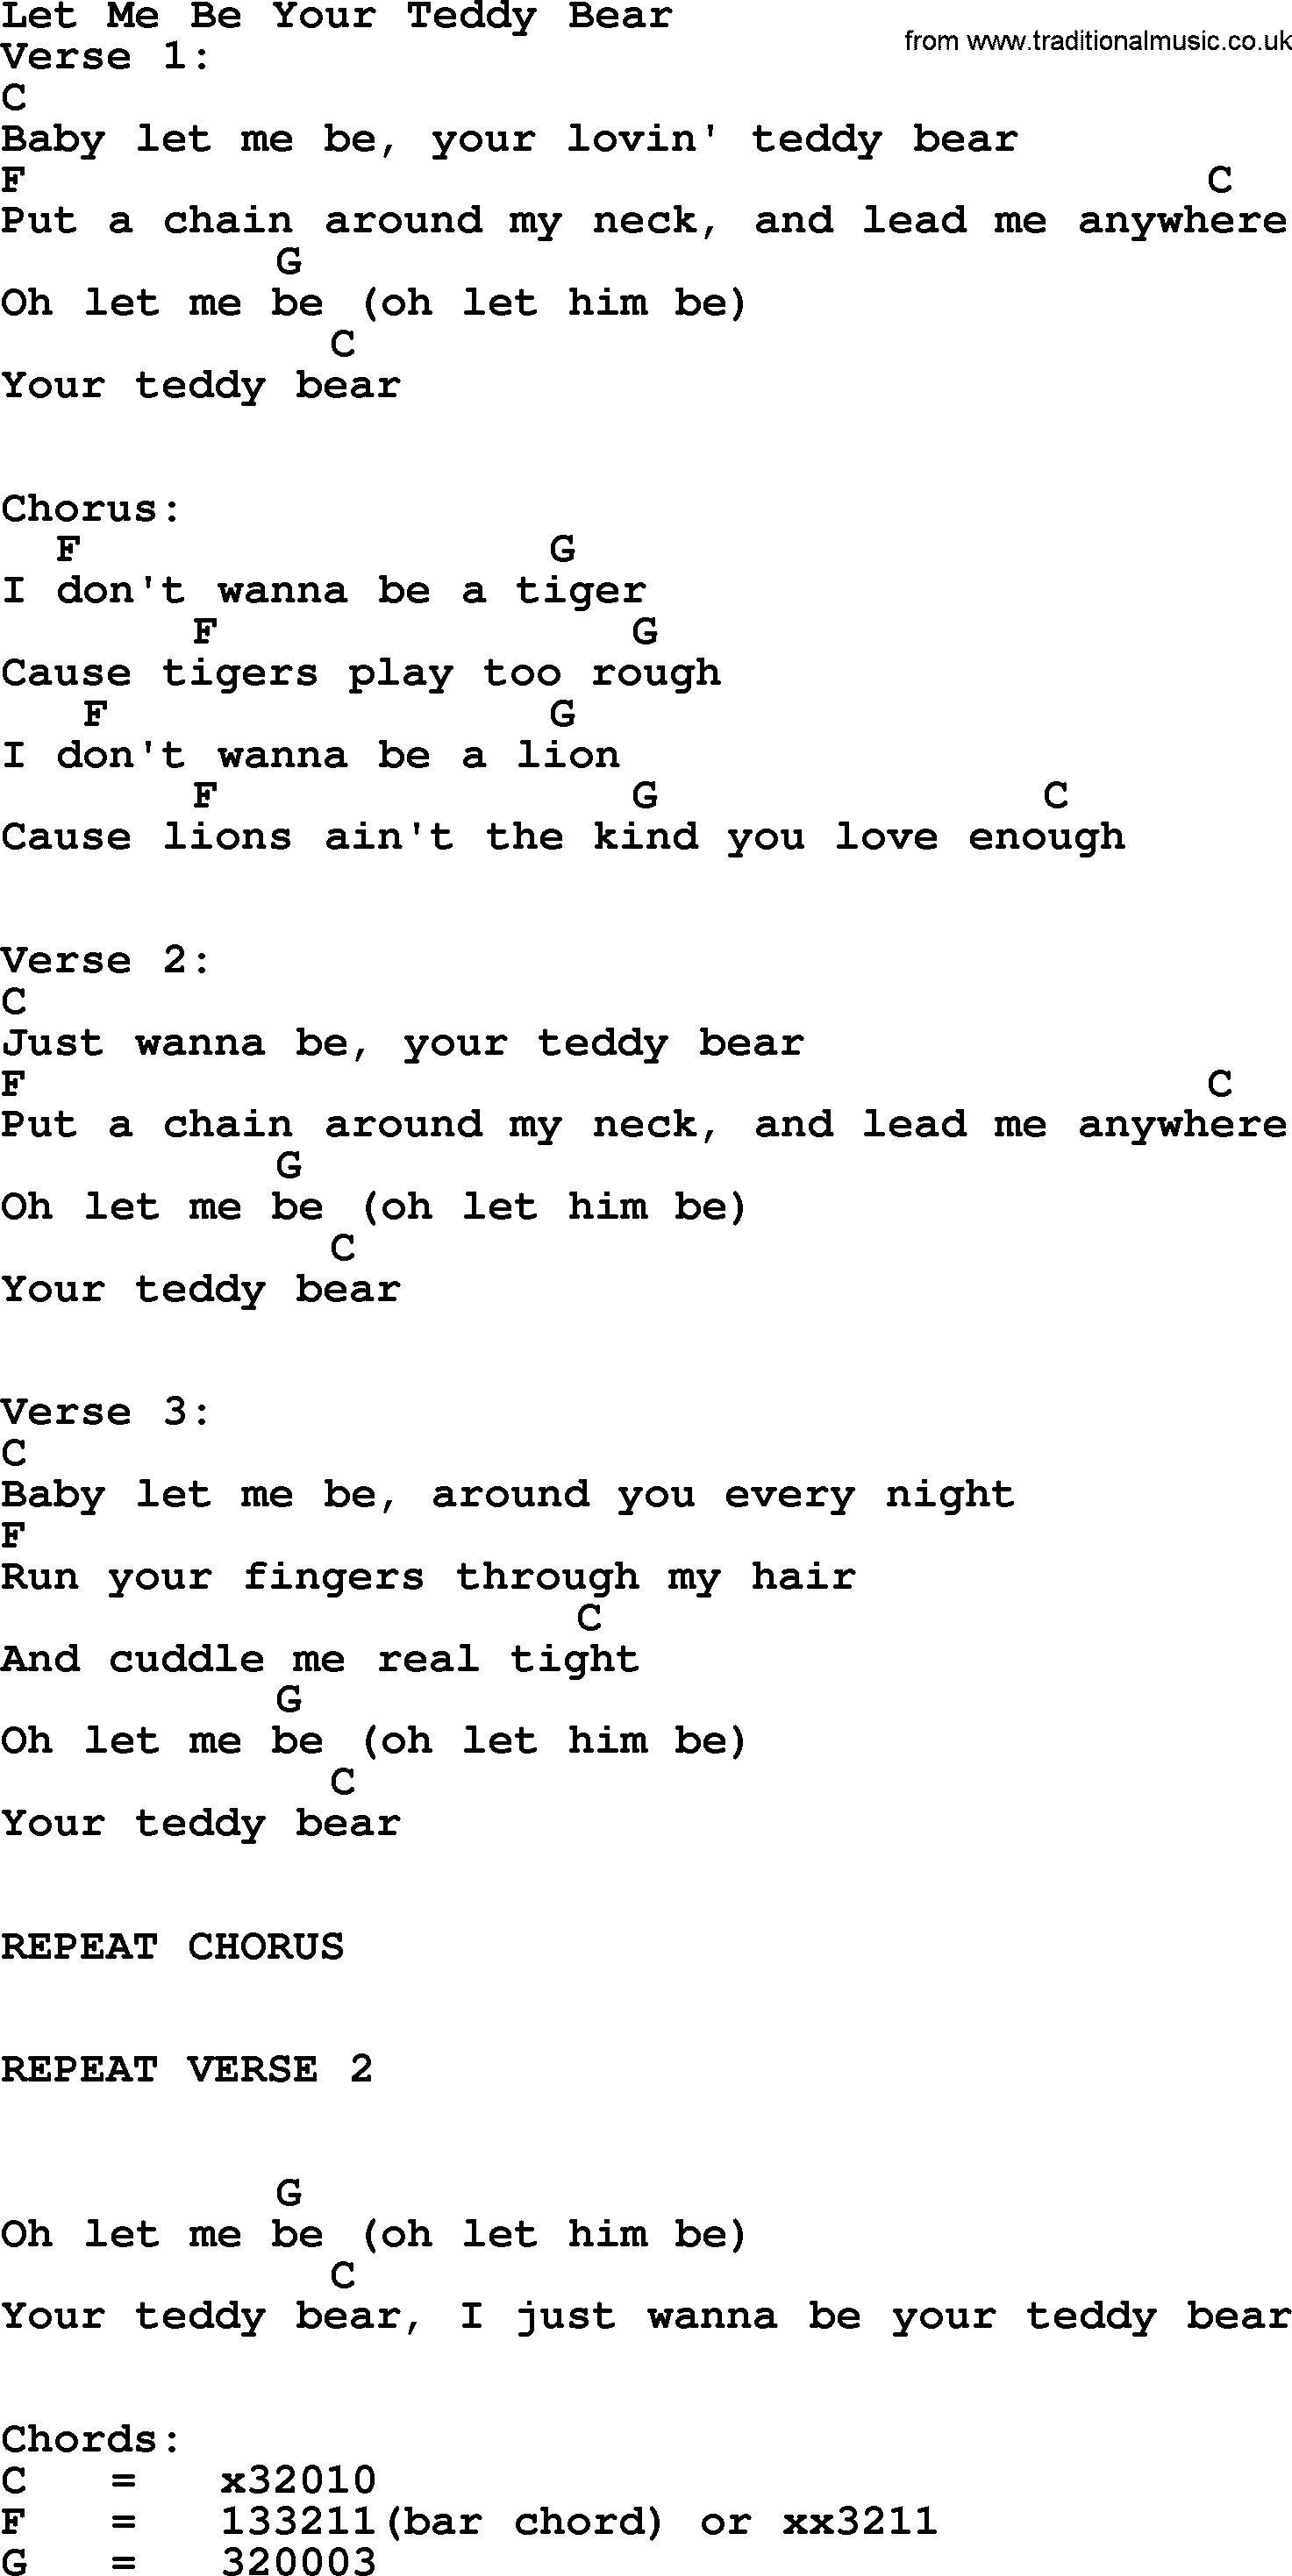 Elvis Presley song: Let Me Be Your Teddy Bear, lyrics and chords